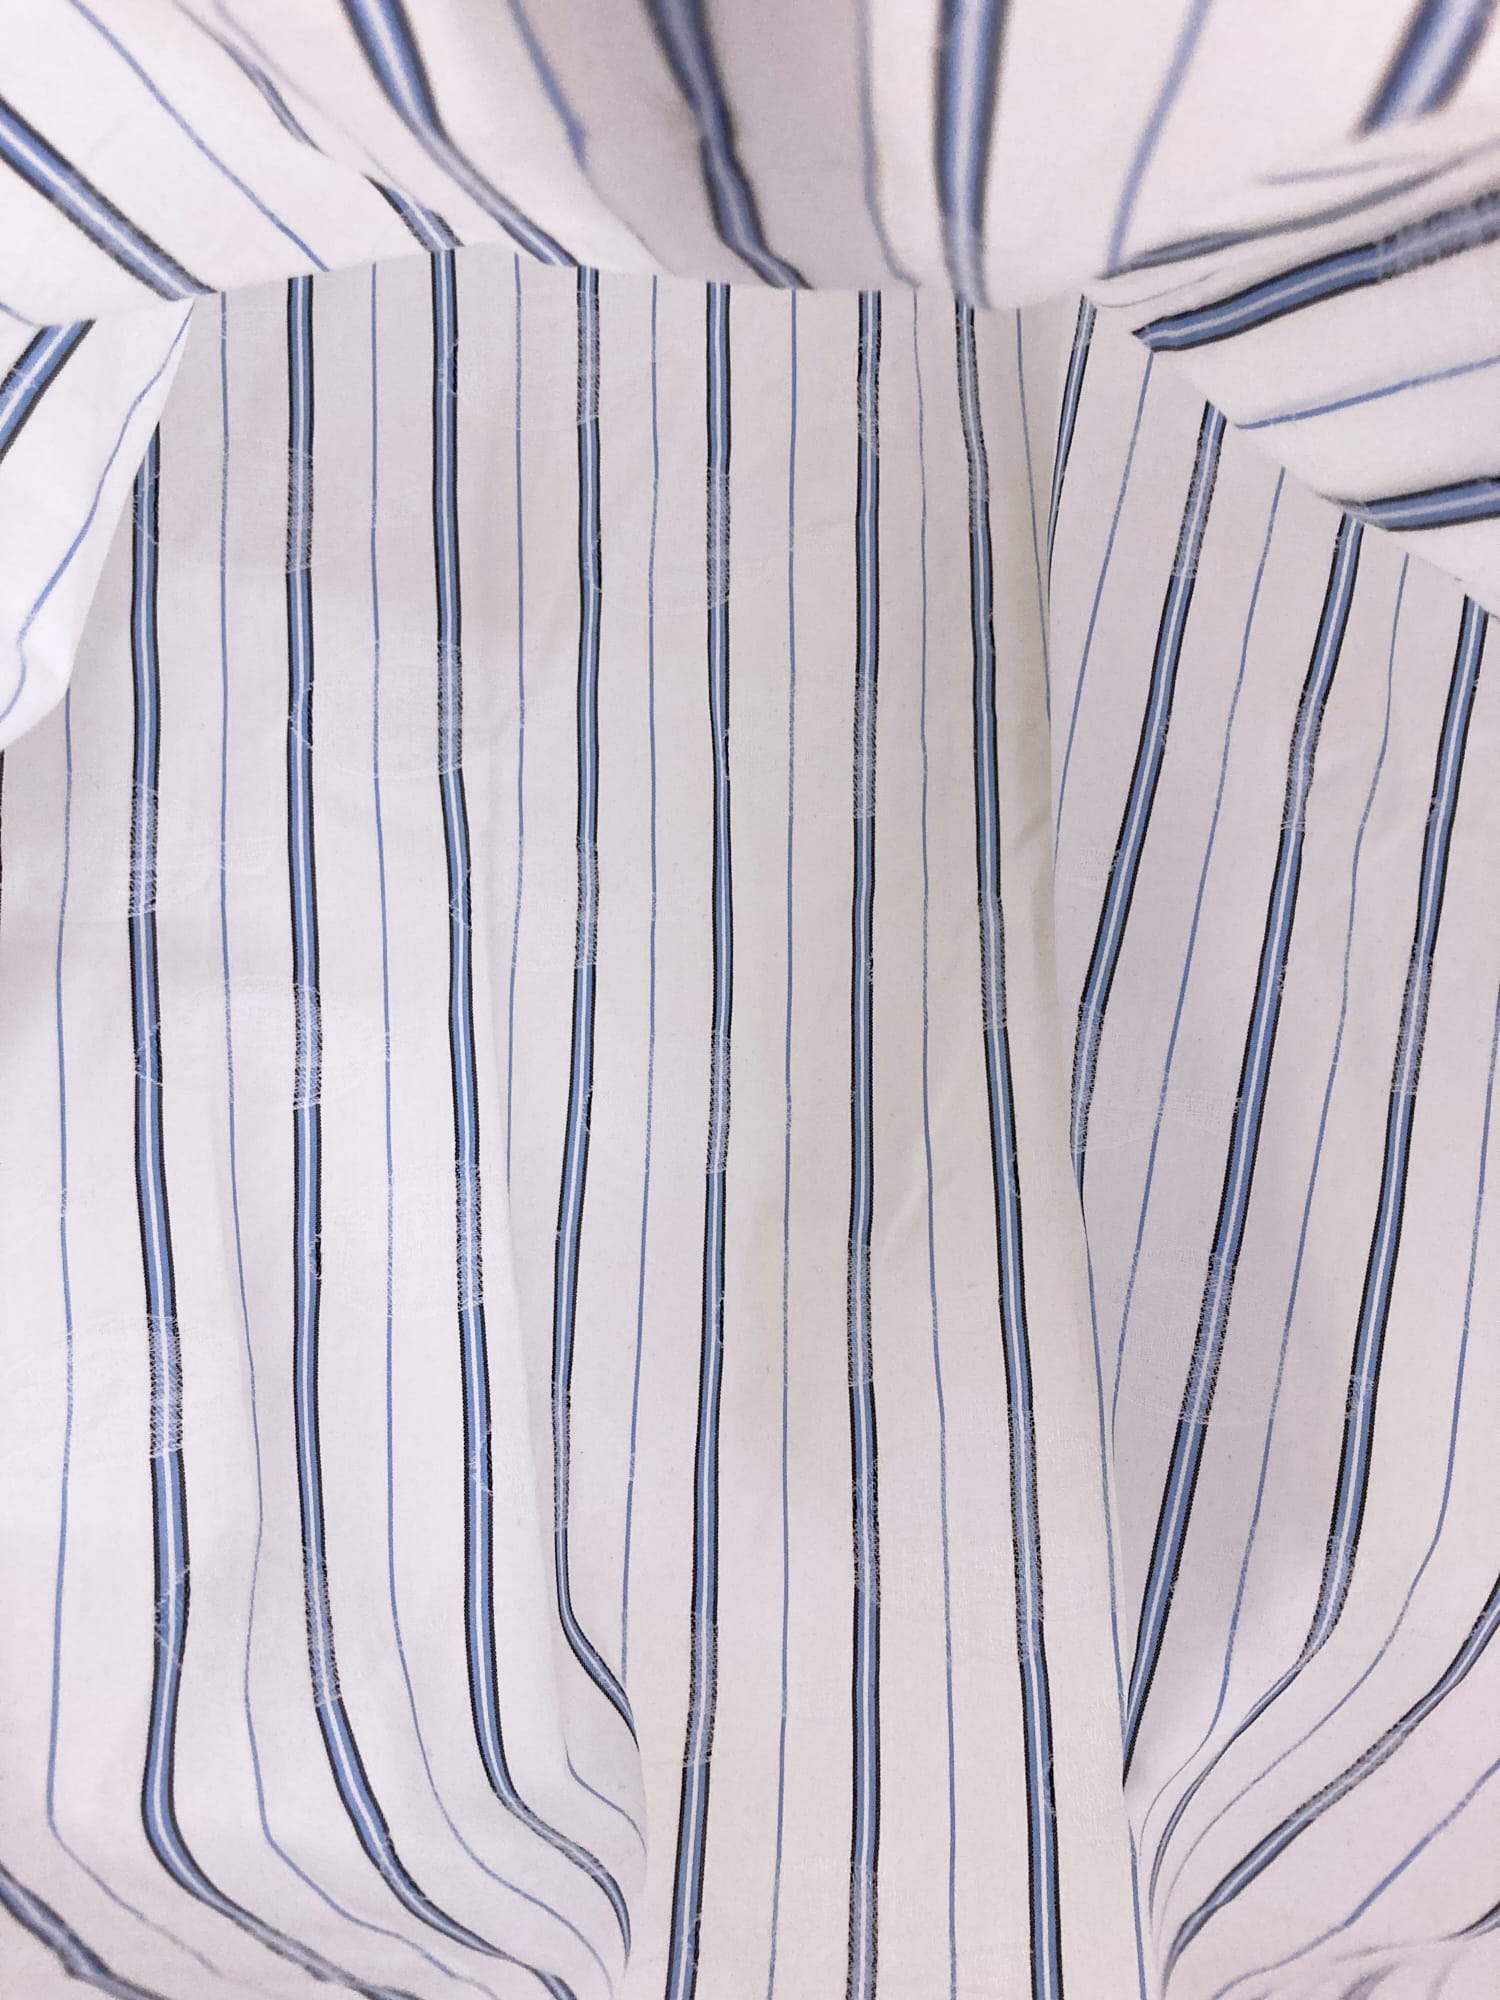 Gianni Versace 1980s white striped shirt with extremely subtle fish pattern